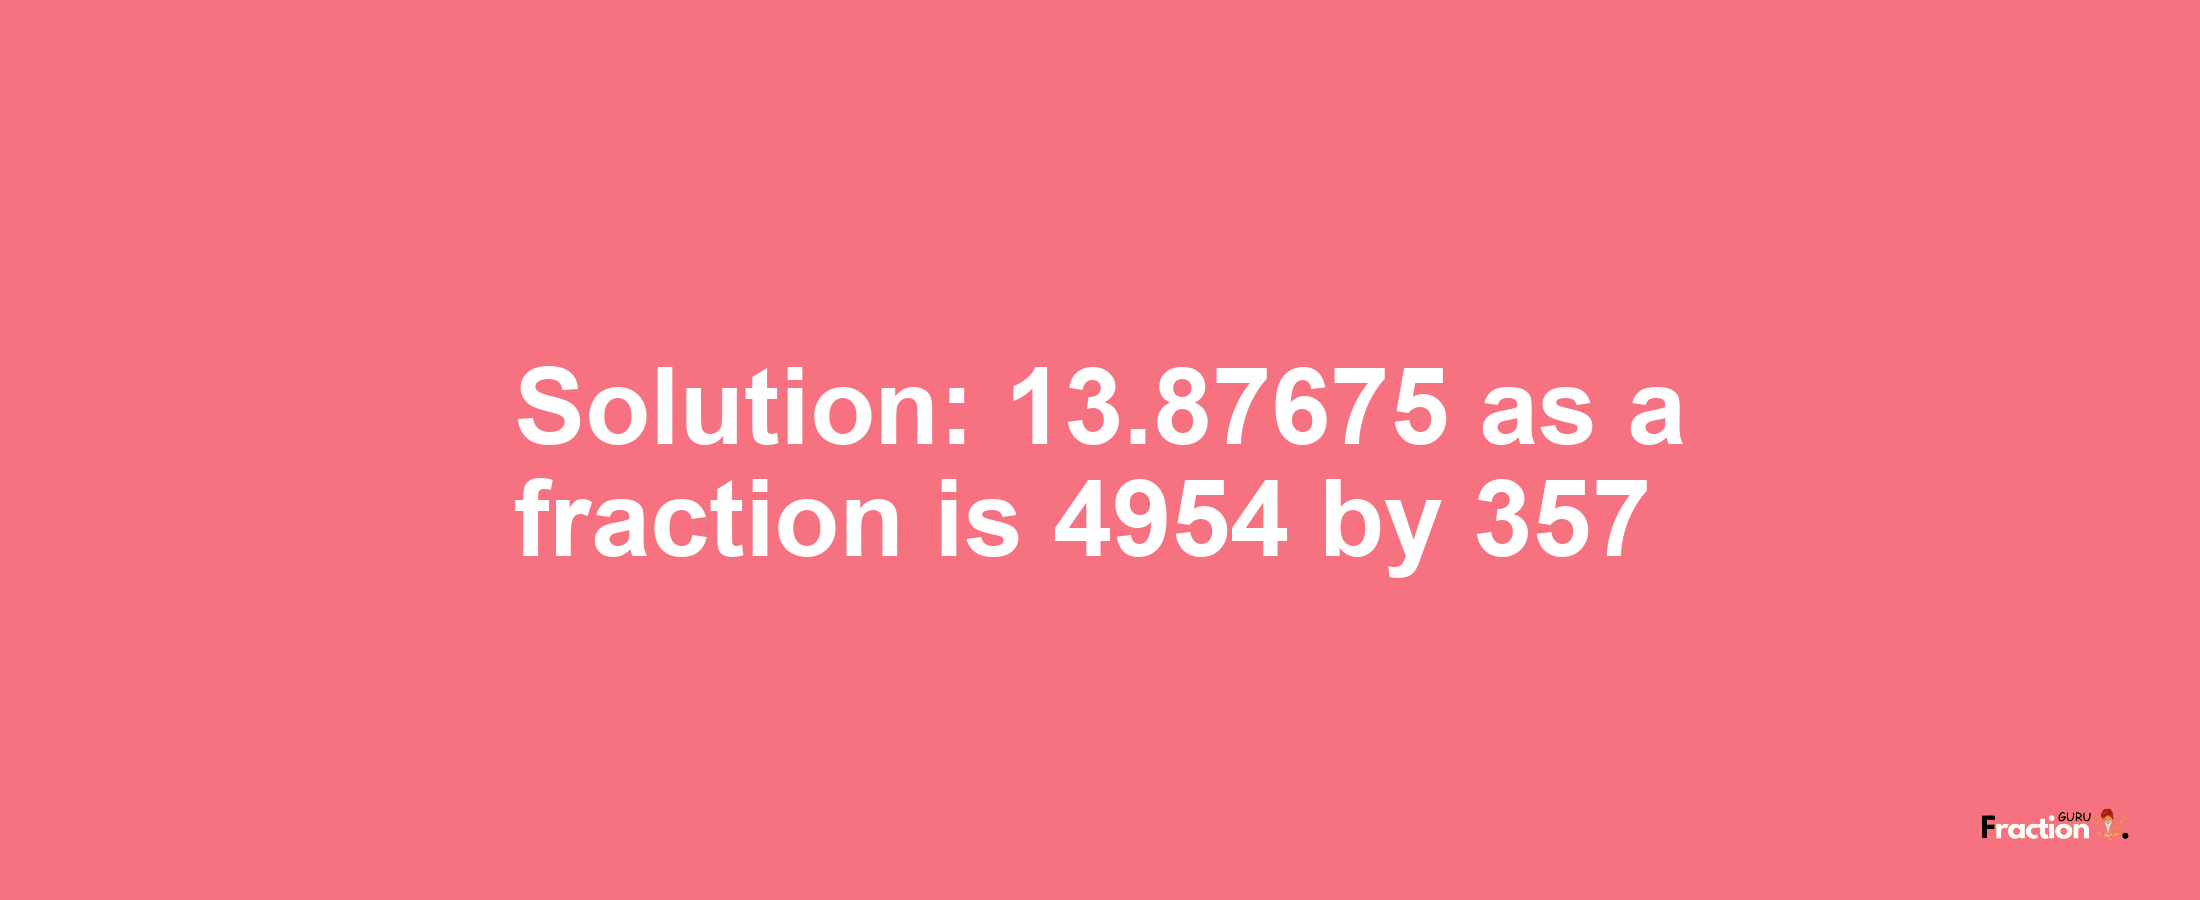 Solution:13.87675 as a fraction is 4954/357